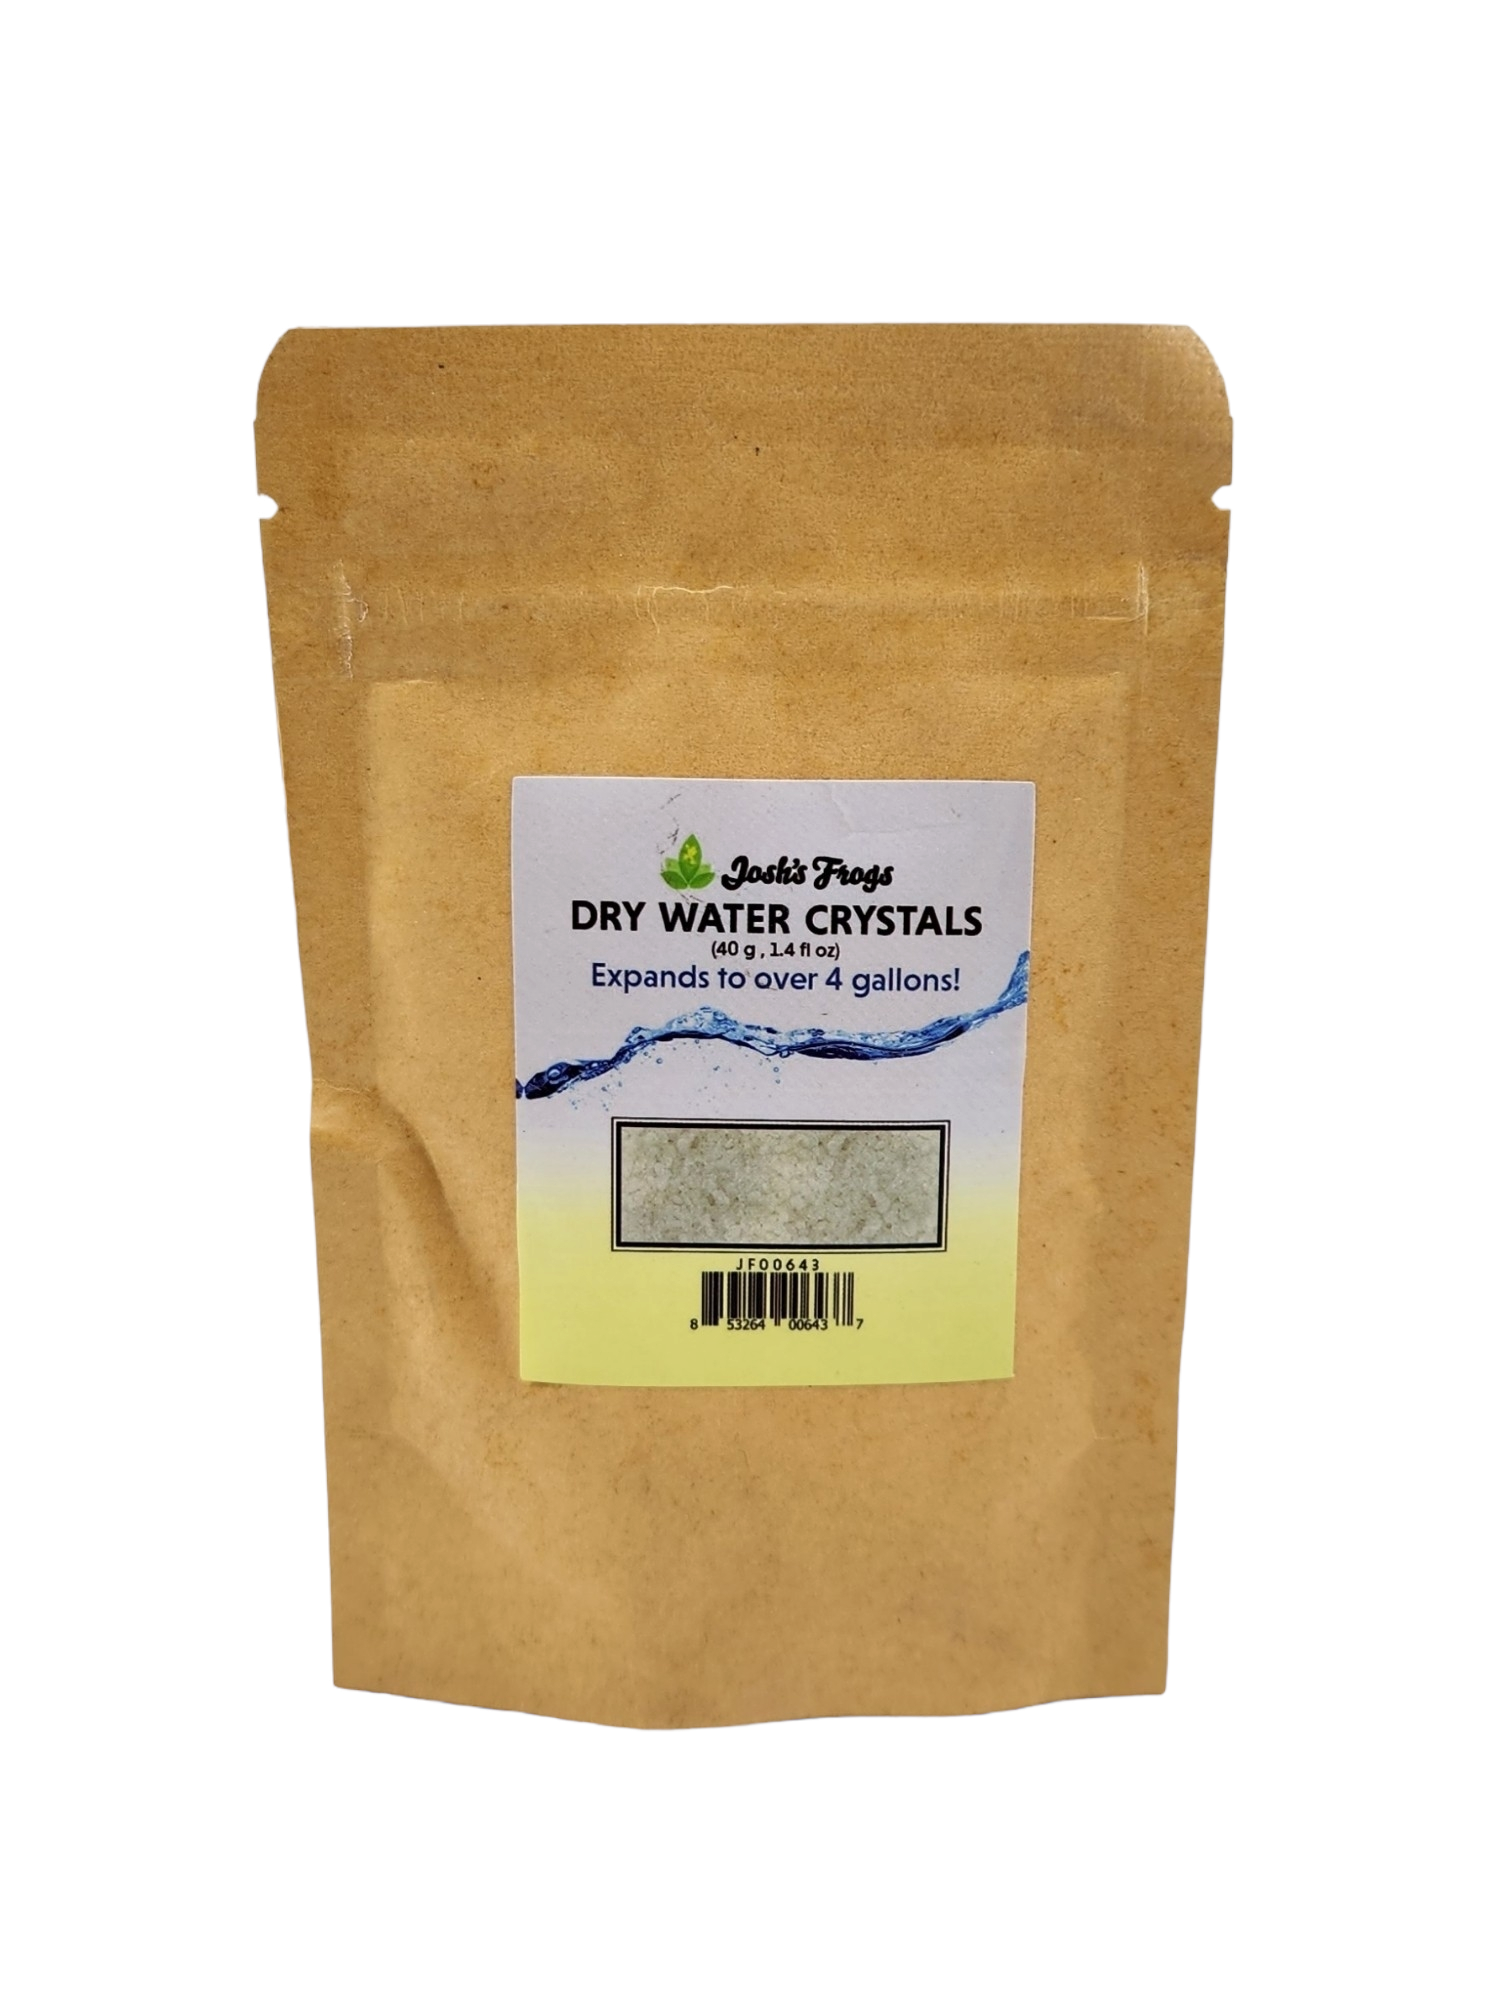 Josh's Frogs DRY Water Crystals (40 g, 1.4 fl. oz)